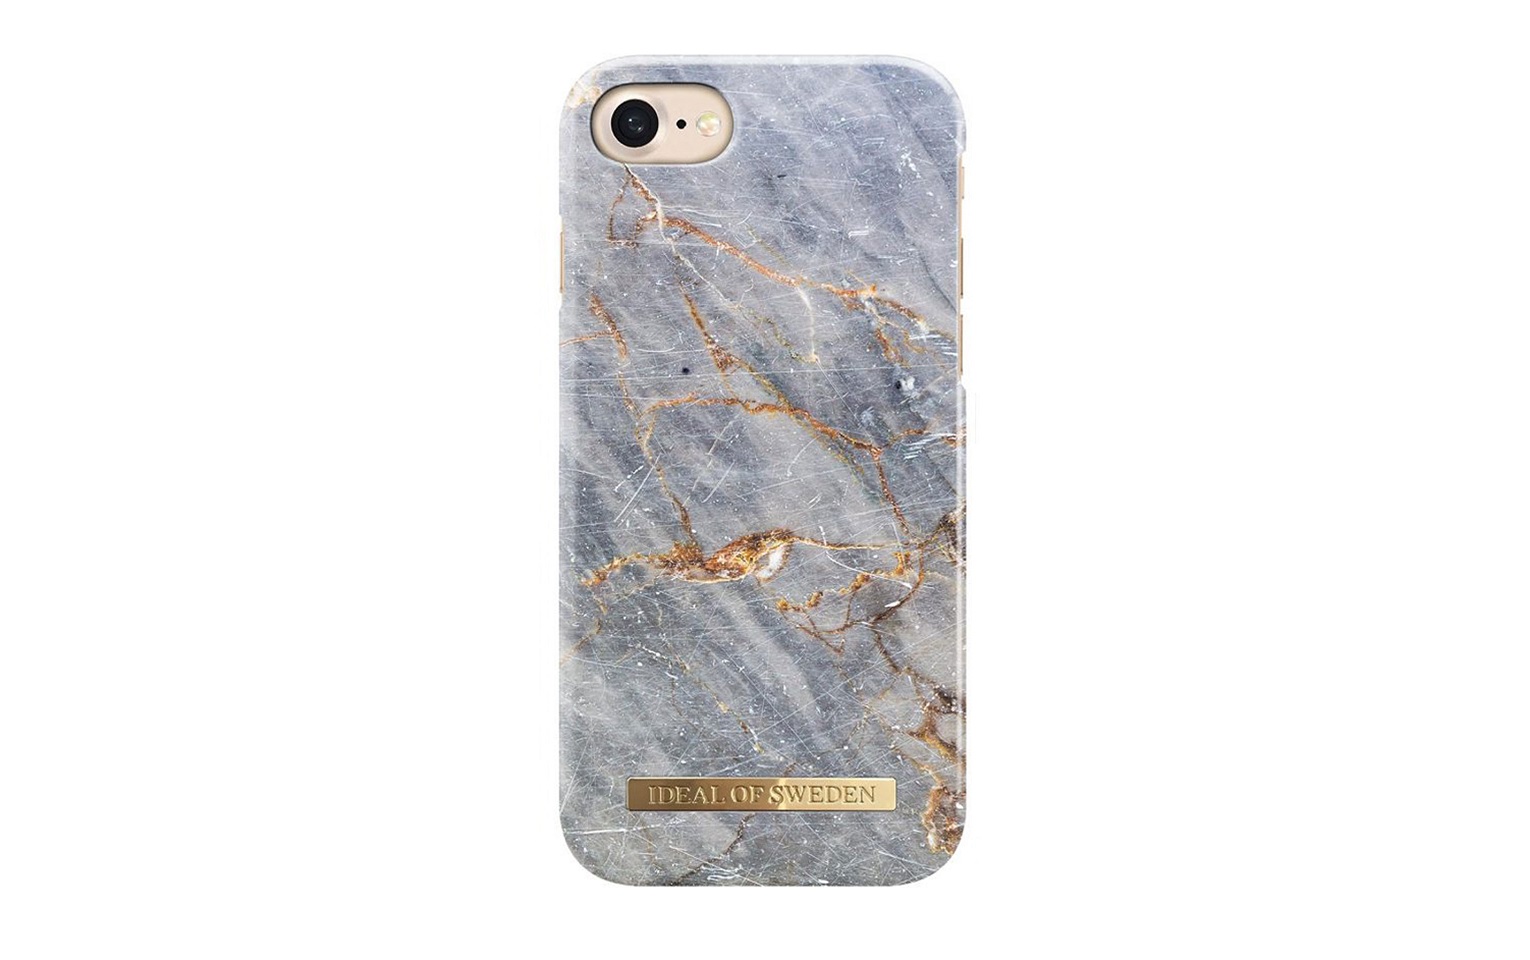 iDeal Fashion Case S/S17 Royal Grey Marble For iPhone 8/7